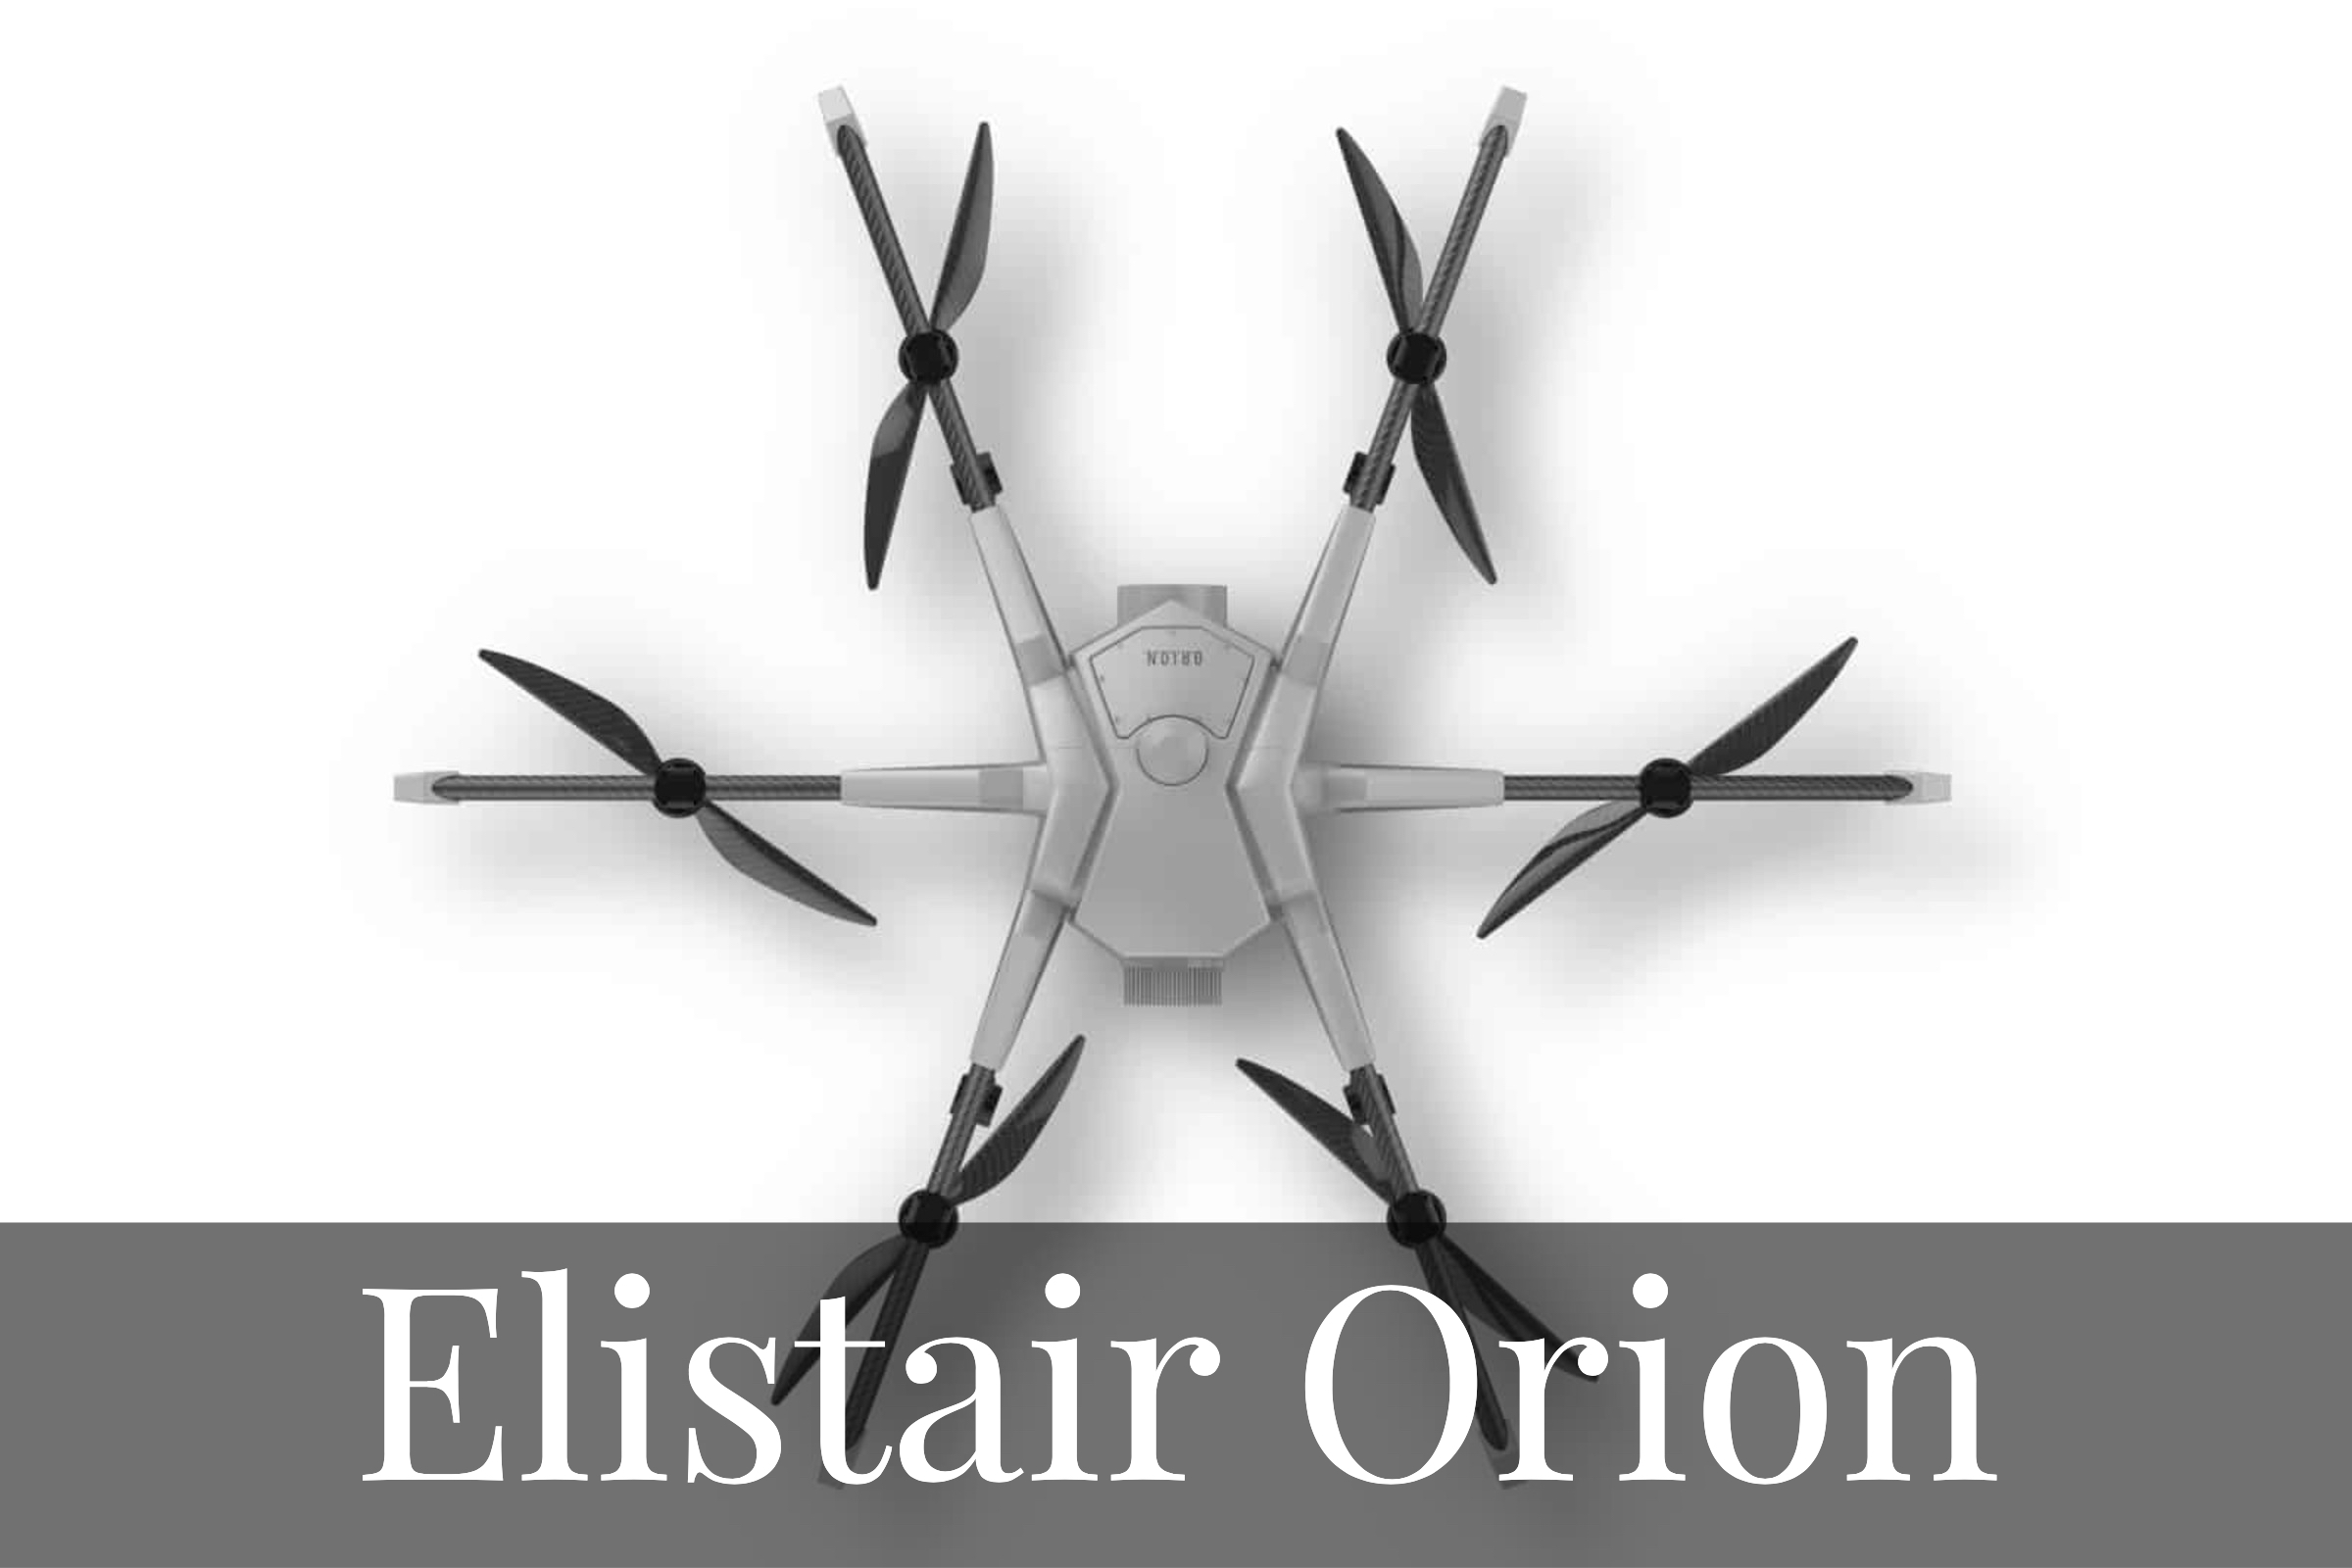 elistair orion top professional drone